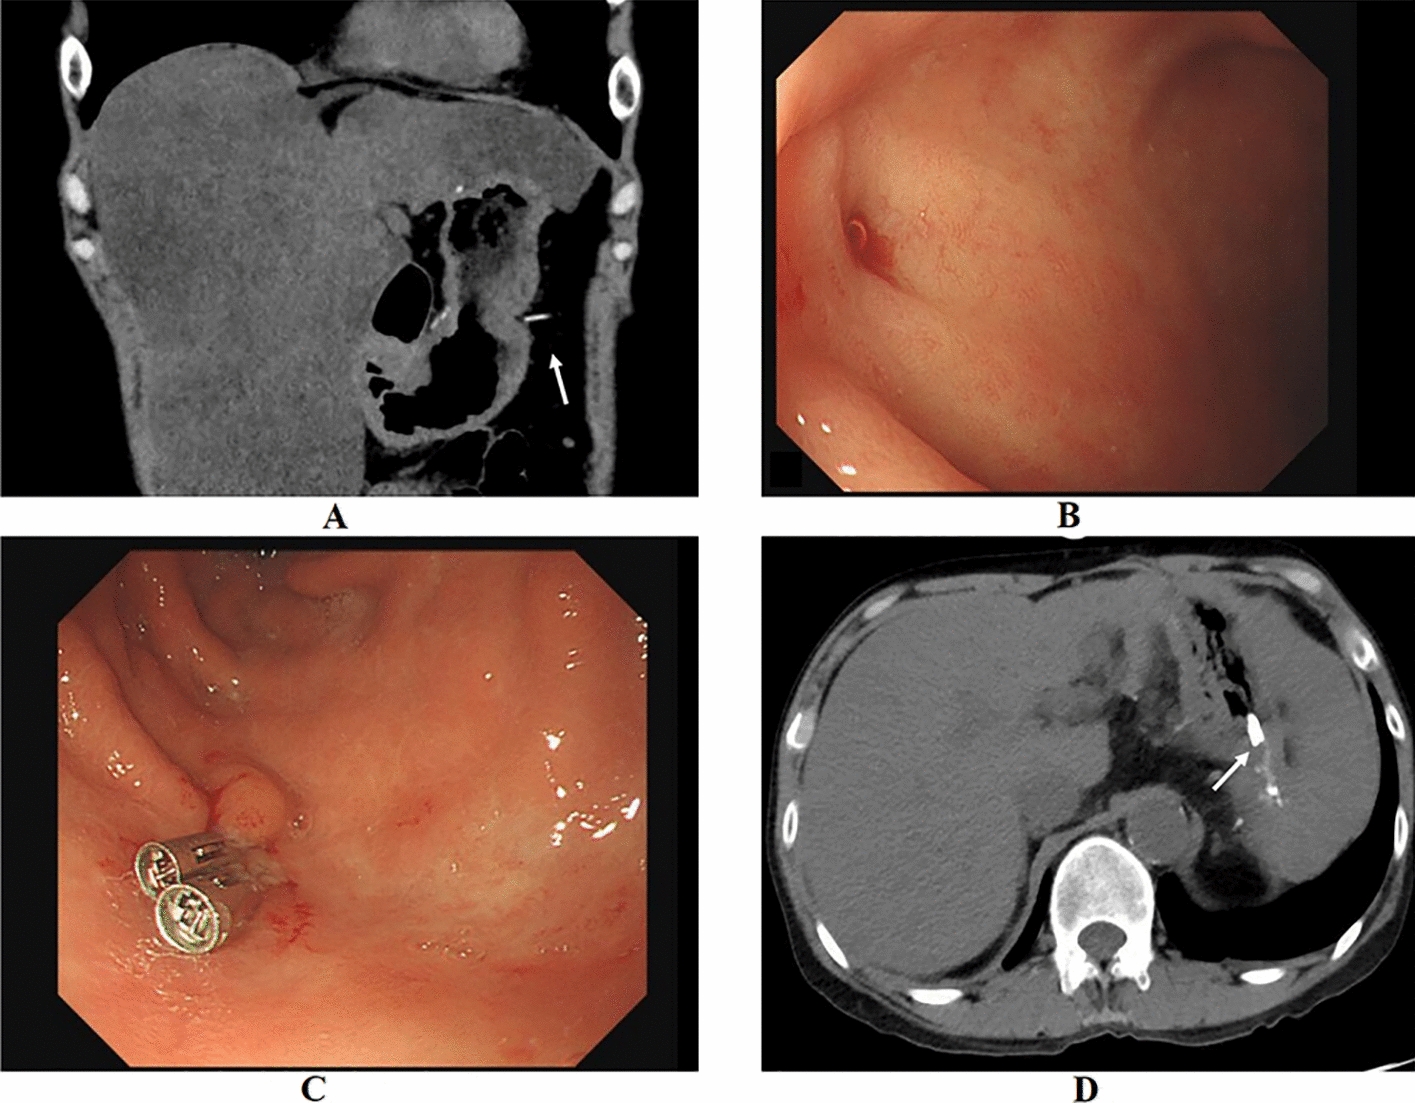 Sinus Formation and Subsequent Bleeding After Splenectomy